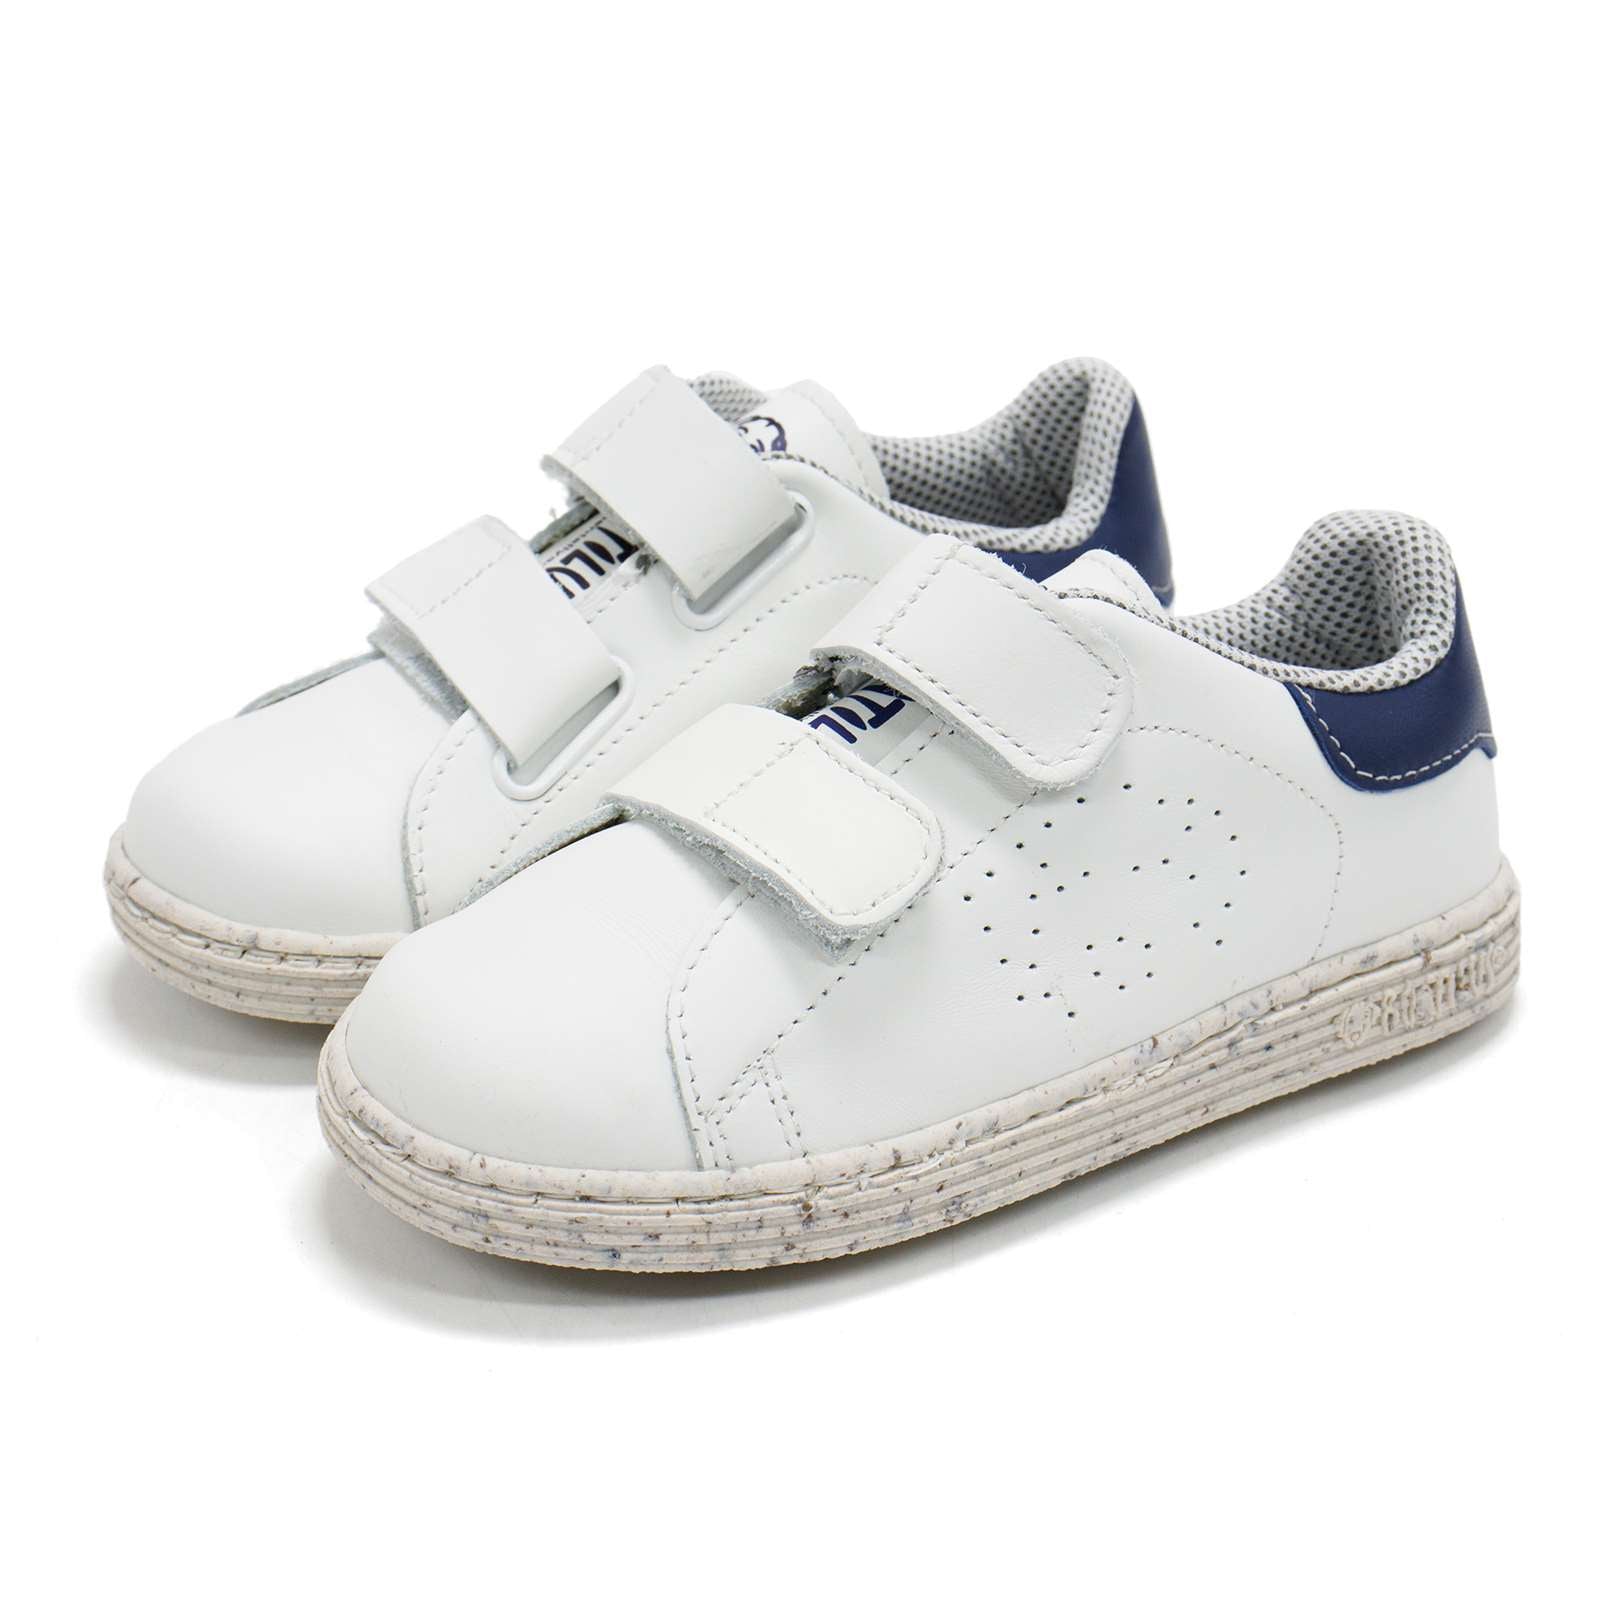 Boatilus Toddler Ds 004 Sneakers